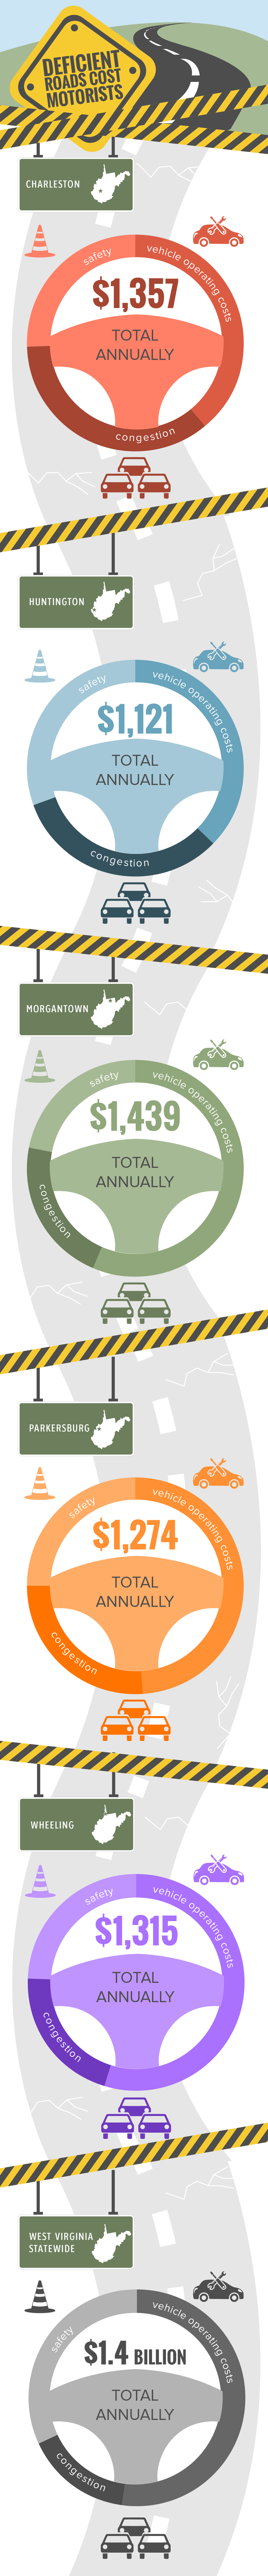 West Virginia Statewide Deficient Roads Infographic By Locality